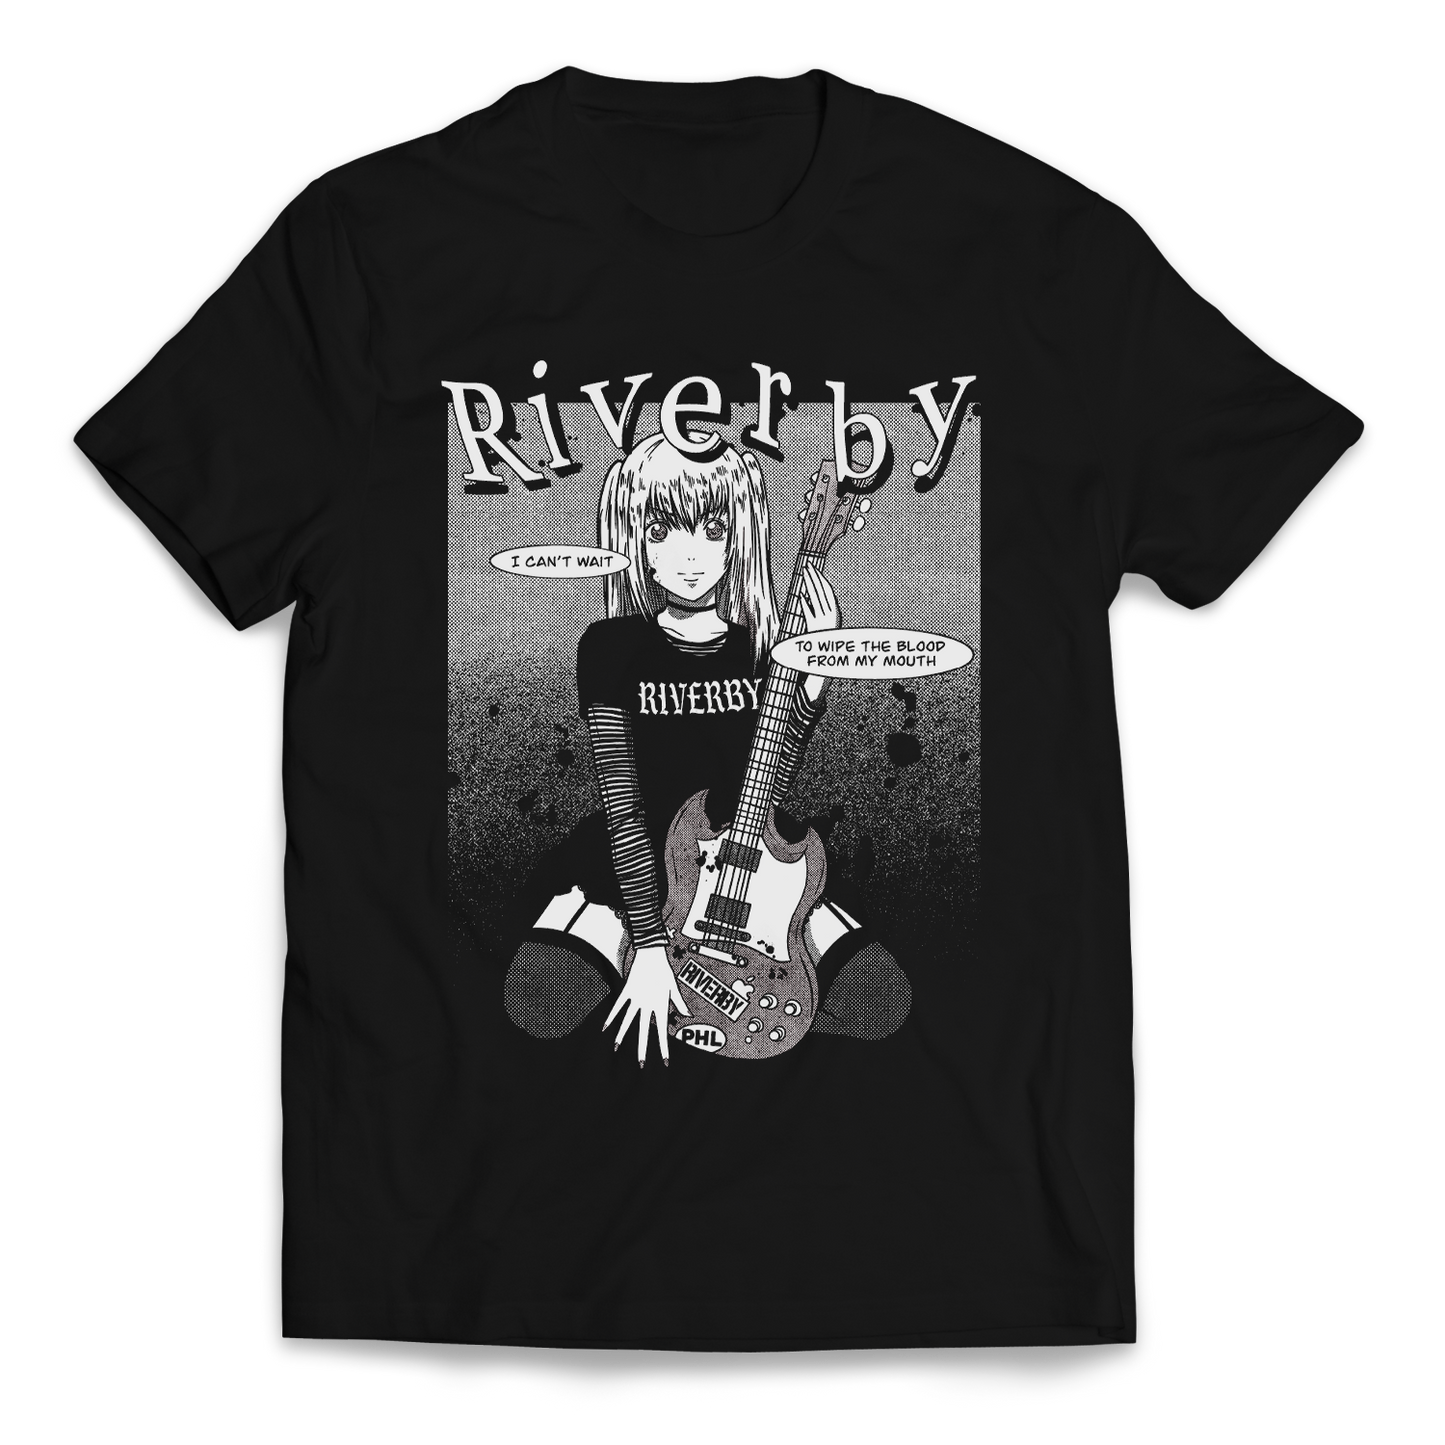 Riverby - "Death Note" T-Shirt